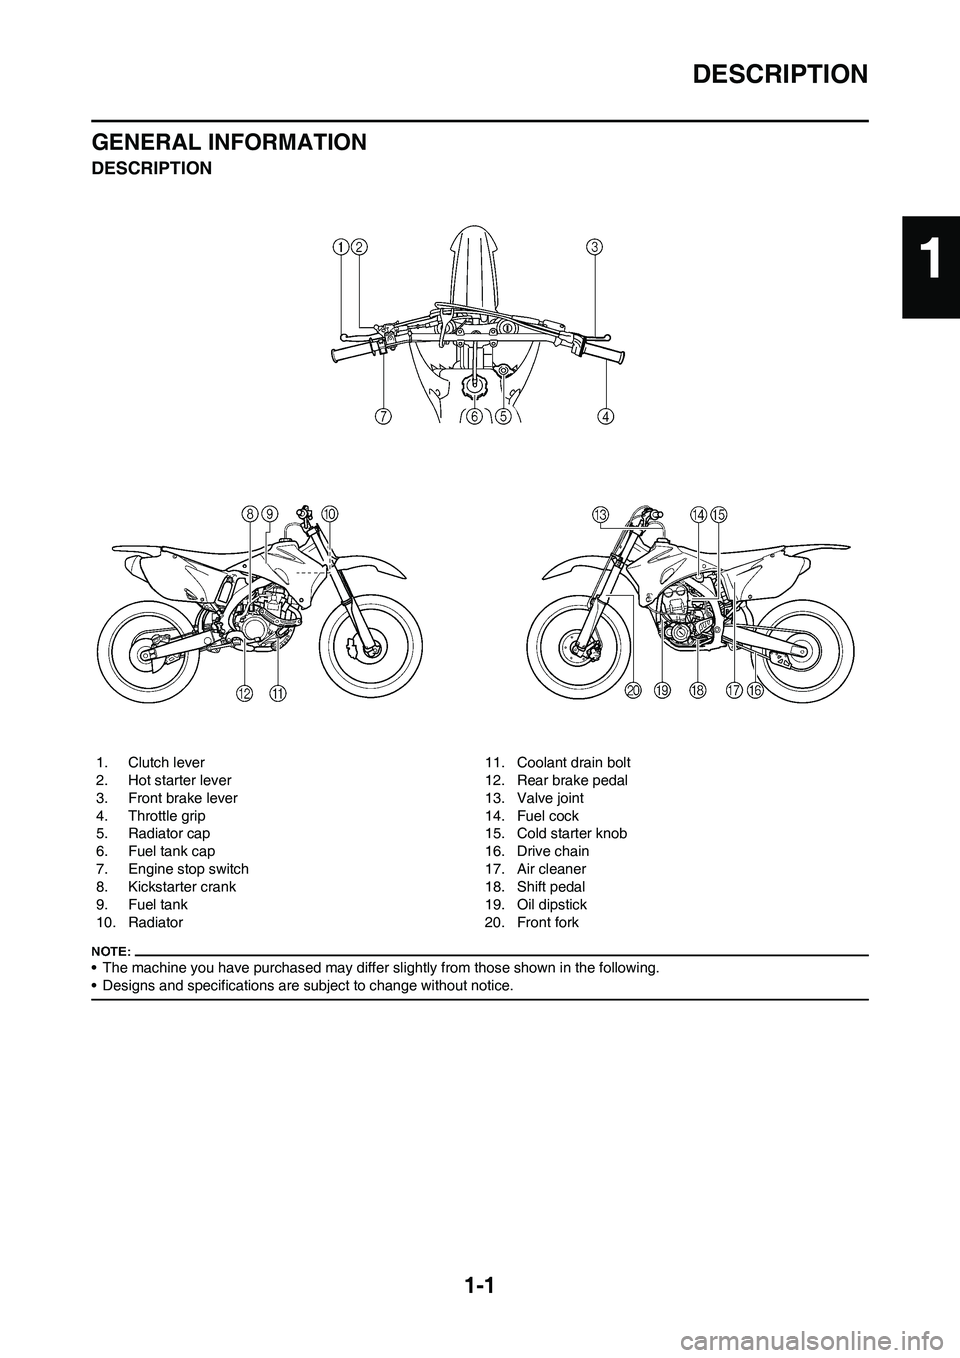 YAMAHA YZ450F 2008  Owners Manual 1-1
DESCRIPTION
GENERAL INFORMATION
DESCRIPTION
• The machine you have purchased may differ slightly from those shown in the following.
• Designs and specifications are subject to change without n